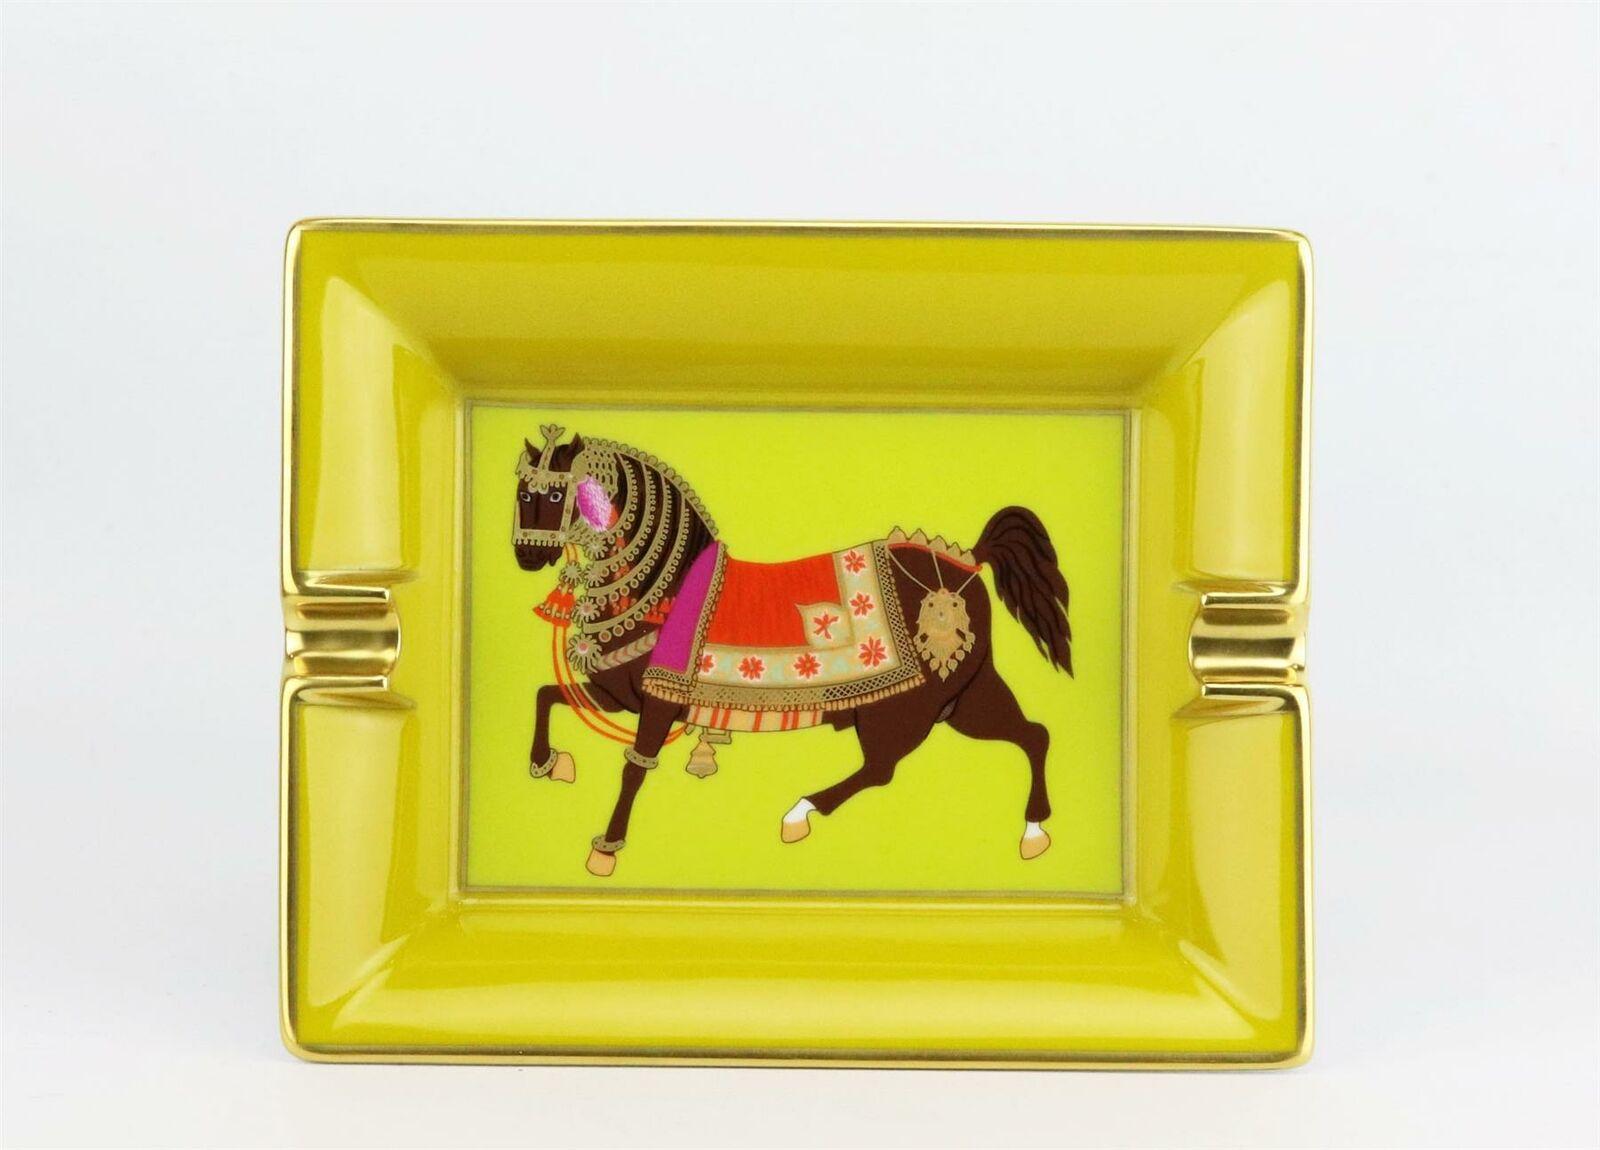 Mustard, lime-green and multi-coloured porcelain Hermès rectangular ashtray with horse accent on a green base centre, gilt trims and suede brand stamp underside.
Does not come with box.

Dimensions: L 7.75 x W 6.25 x D 1.6 inches

Condition: Used.